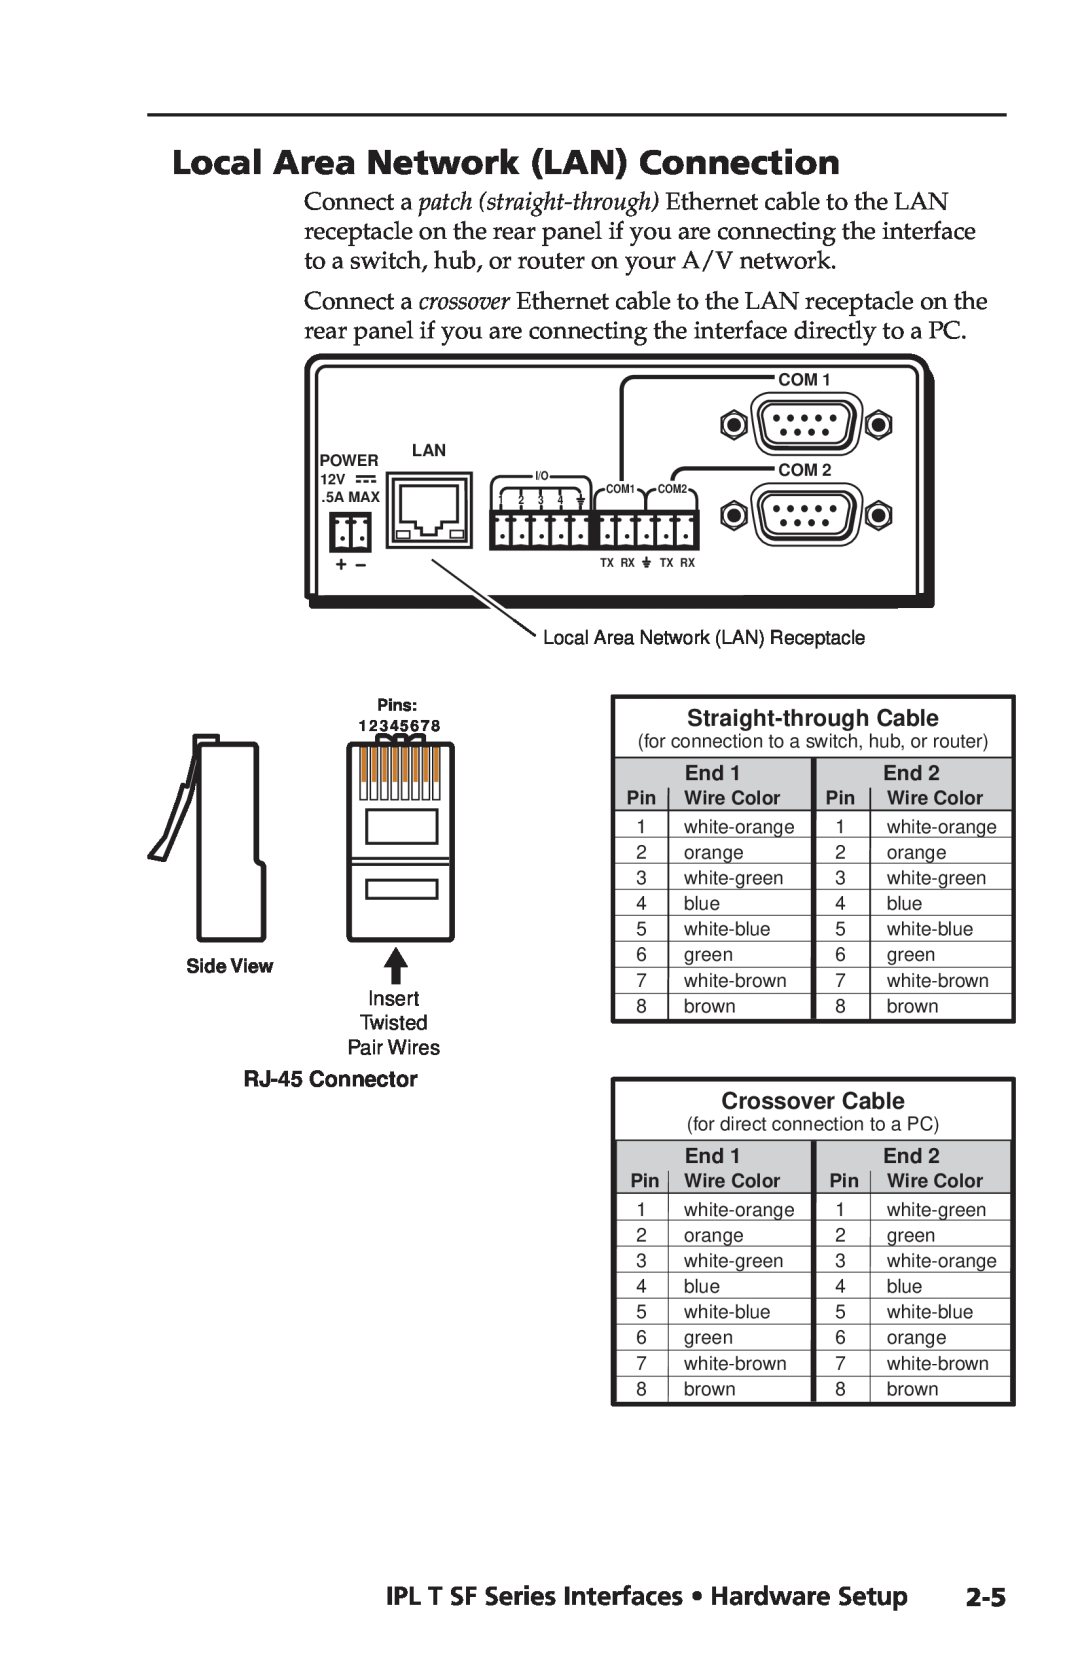 Extron electronic Local Area Network LAN Connection, IPL T SF Series Interfaces Hardware Setup, RJ-45 Connector 